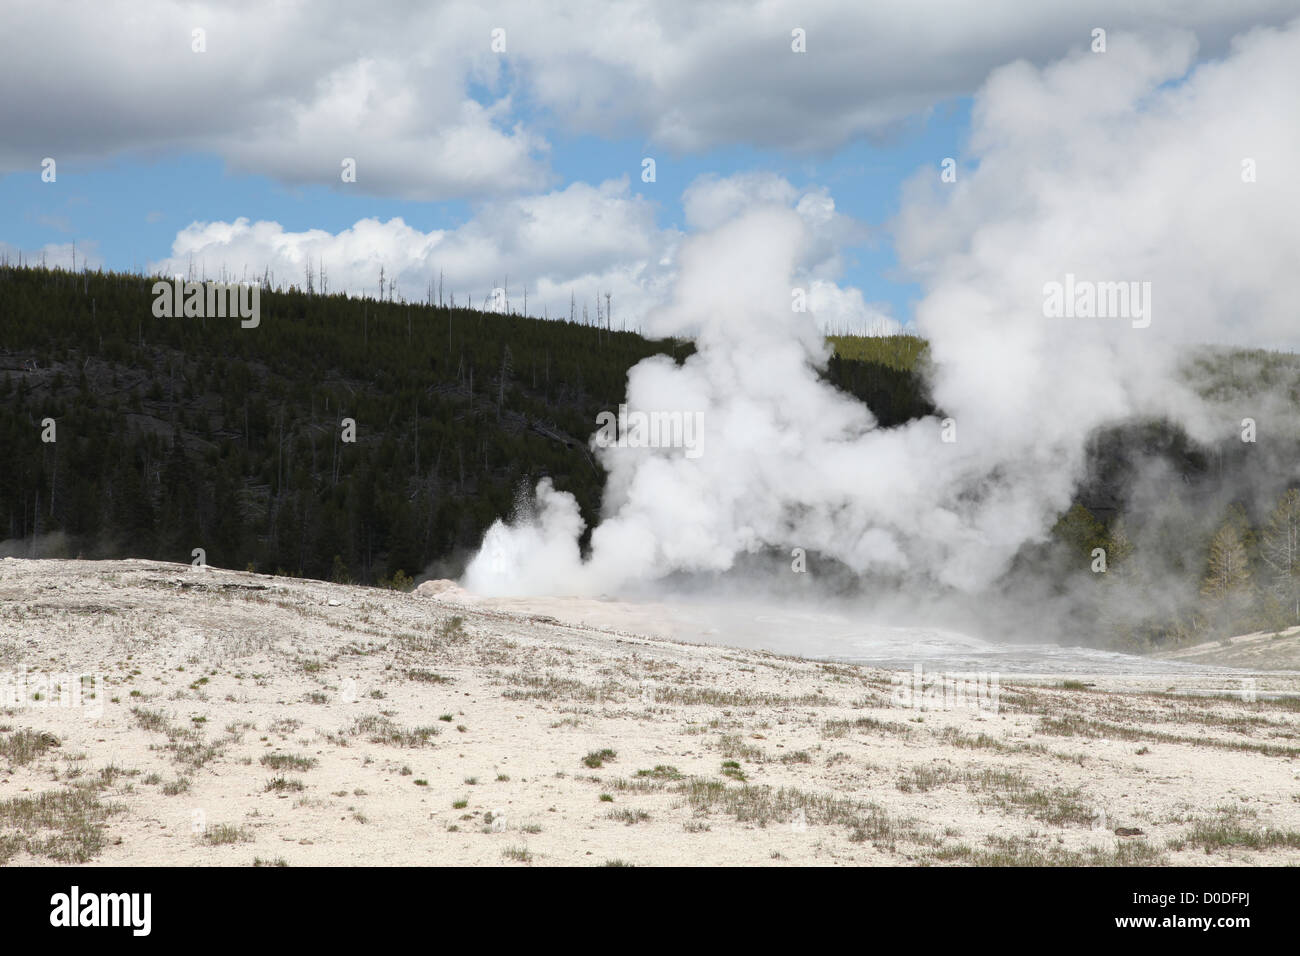 Old Faithful Geyser, Yellowstone National Park, Wyoming, USA Banque D'Images